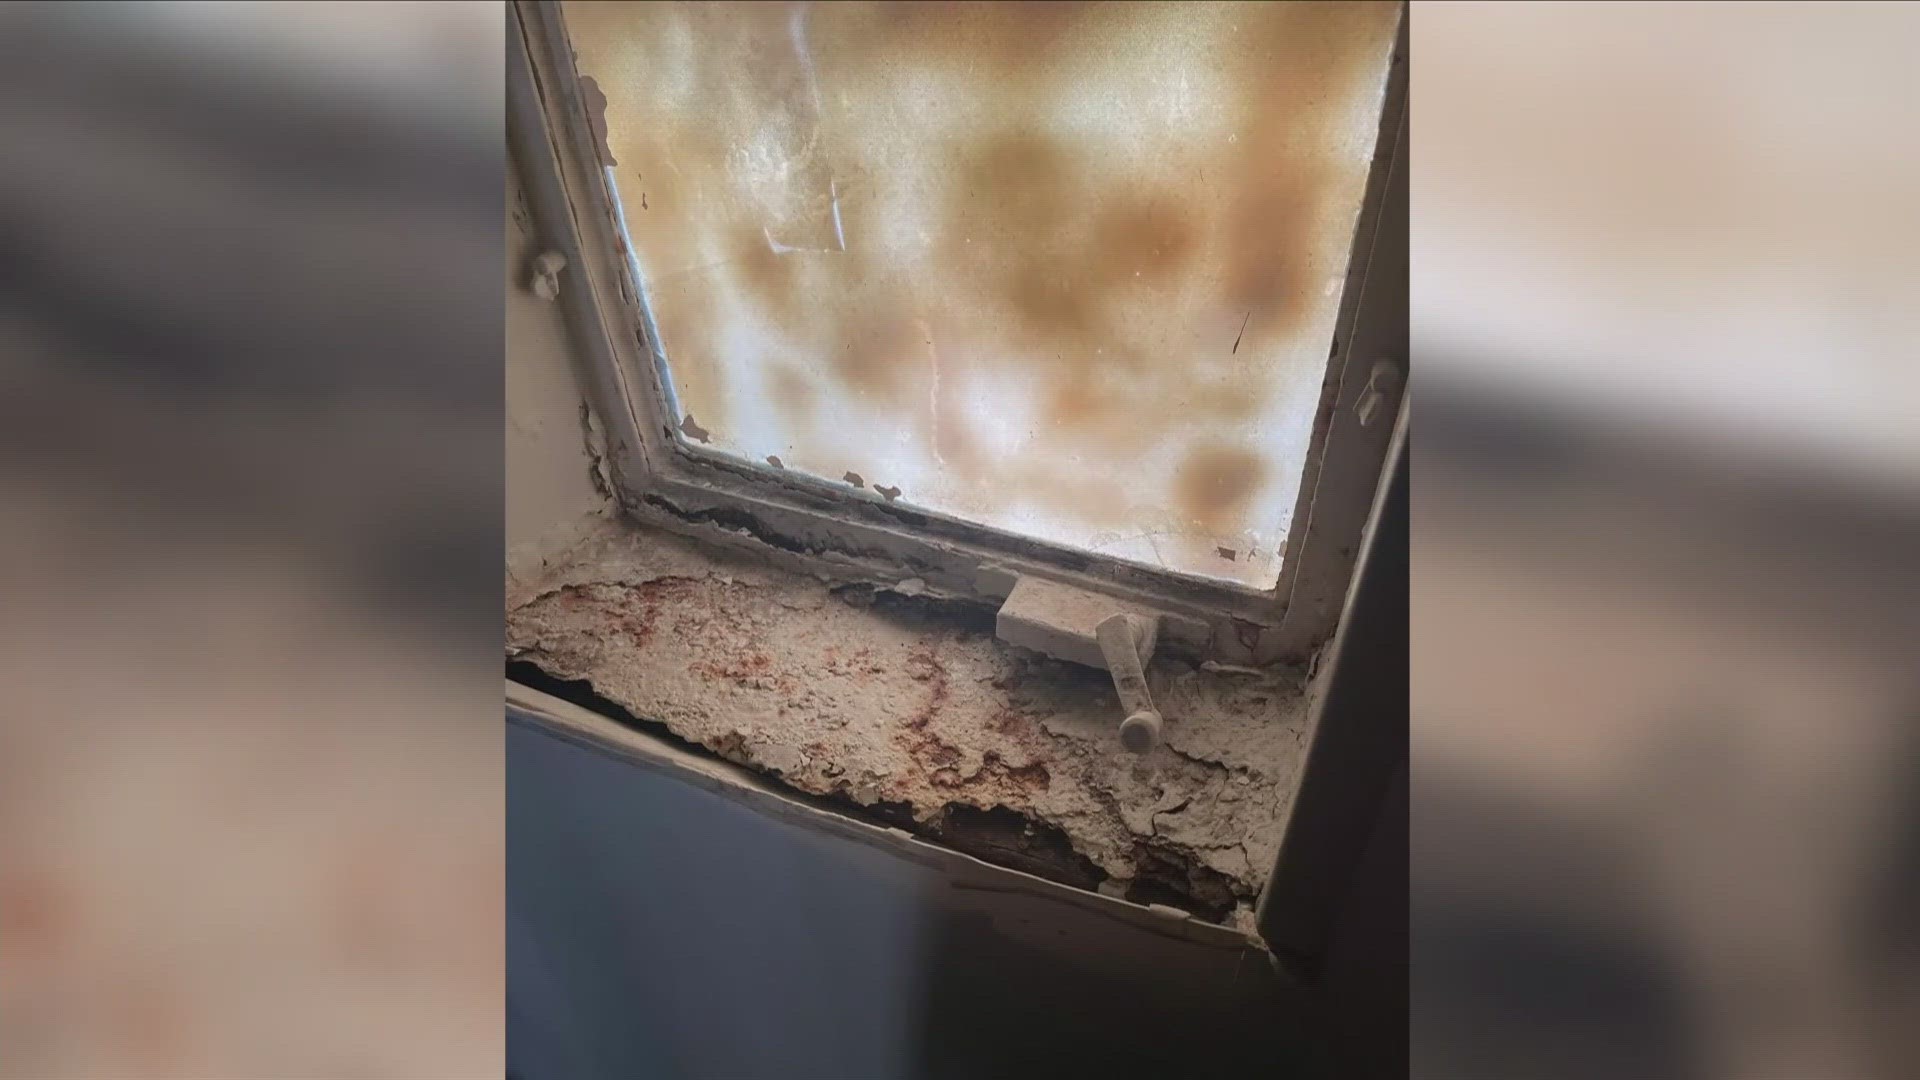 A Memphis renter said Revid Property Management is unresponsive to her issues, including mold, faulty wiring and a leaky roof.